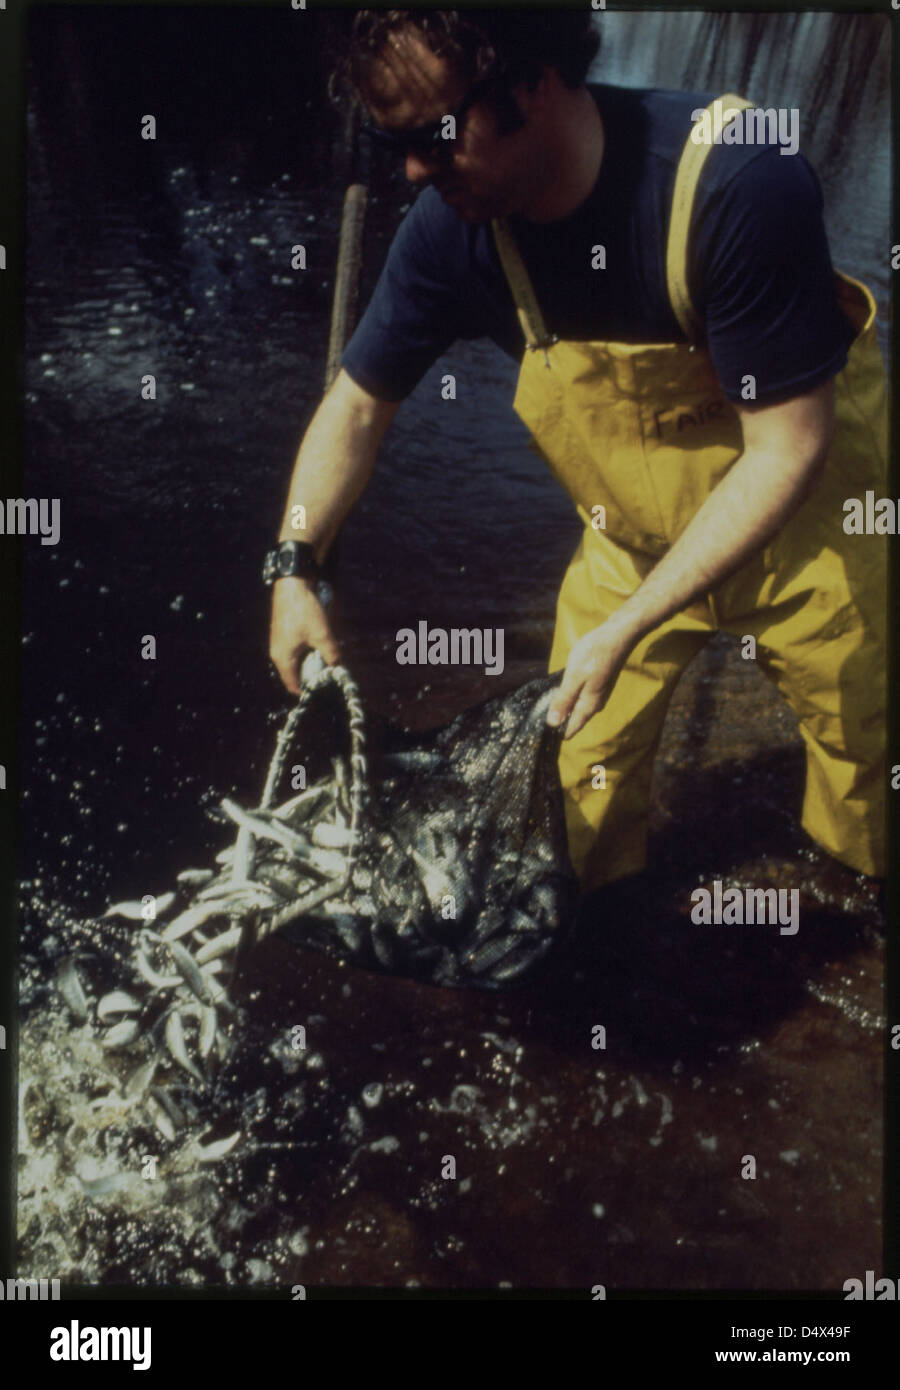 Massachusetts Division of Marine Fisheries Is Responsible for Stocking the North River with These Pacific Coast 'Cohoe' Salmon . . . 04/1973 Stock Photo